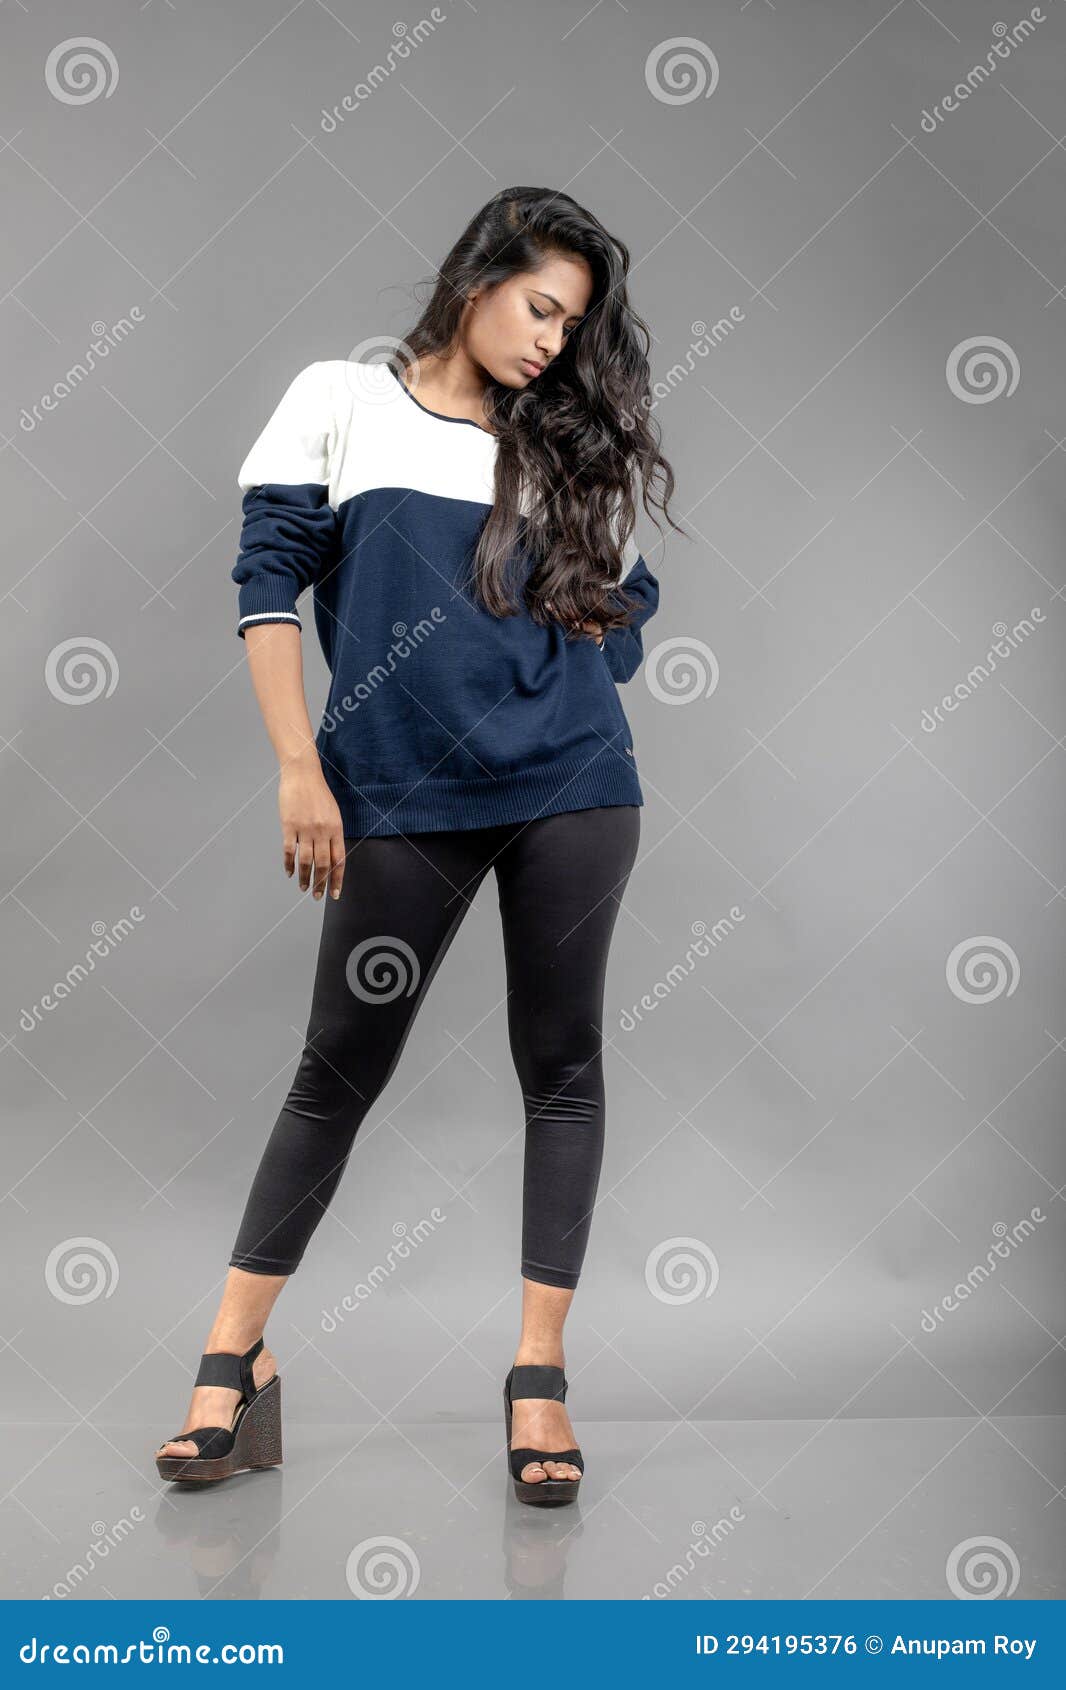 Indian Young Female Model in Casual Winterwear Against Grey Background.  Long Black Haired Model Wearing Black Leggings, Blue and Stock Photo -  Image of casual, jumper: 294195376